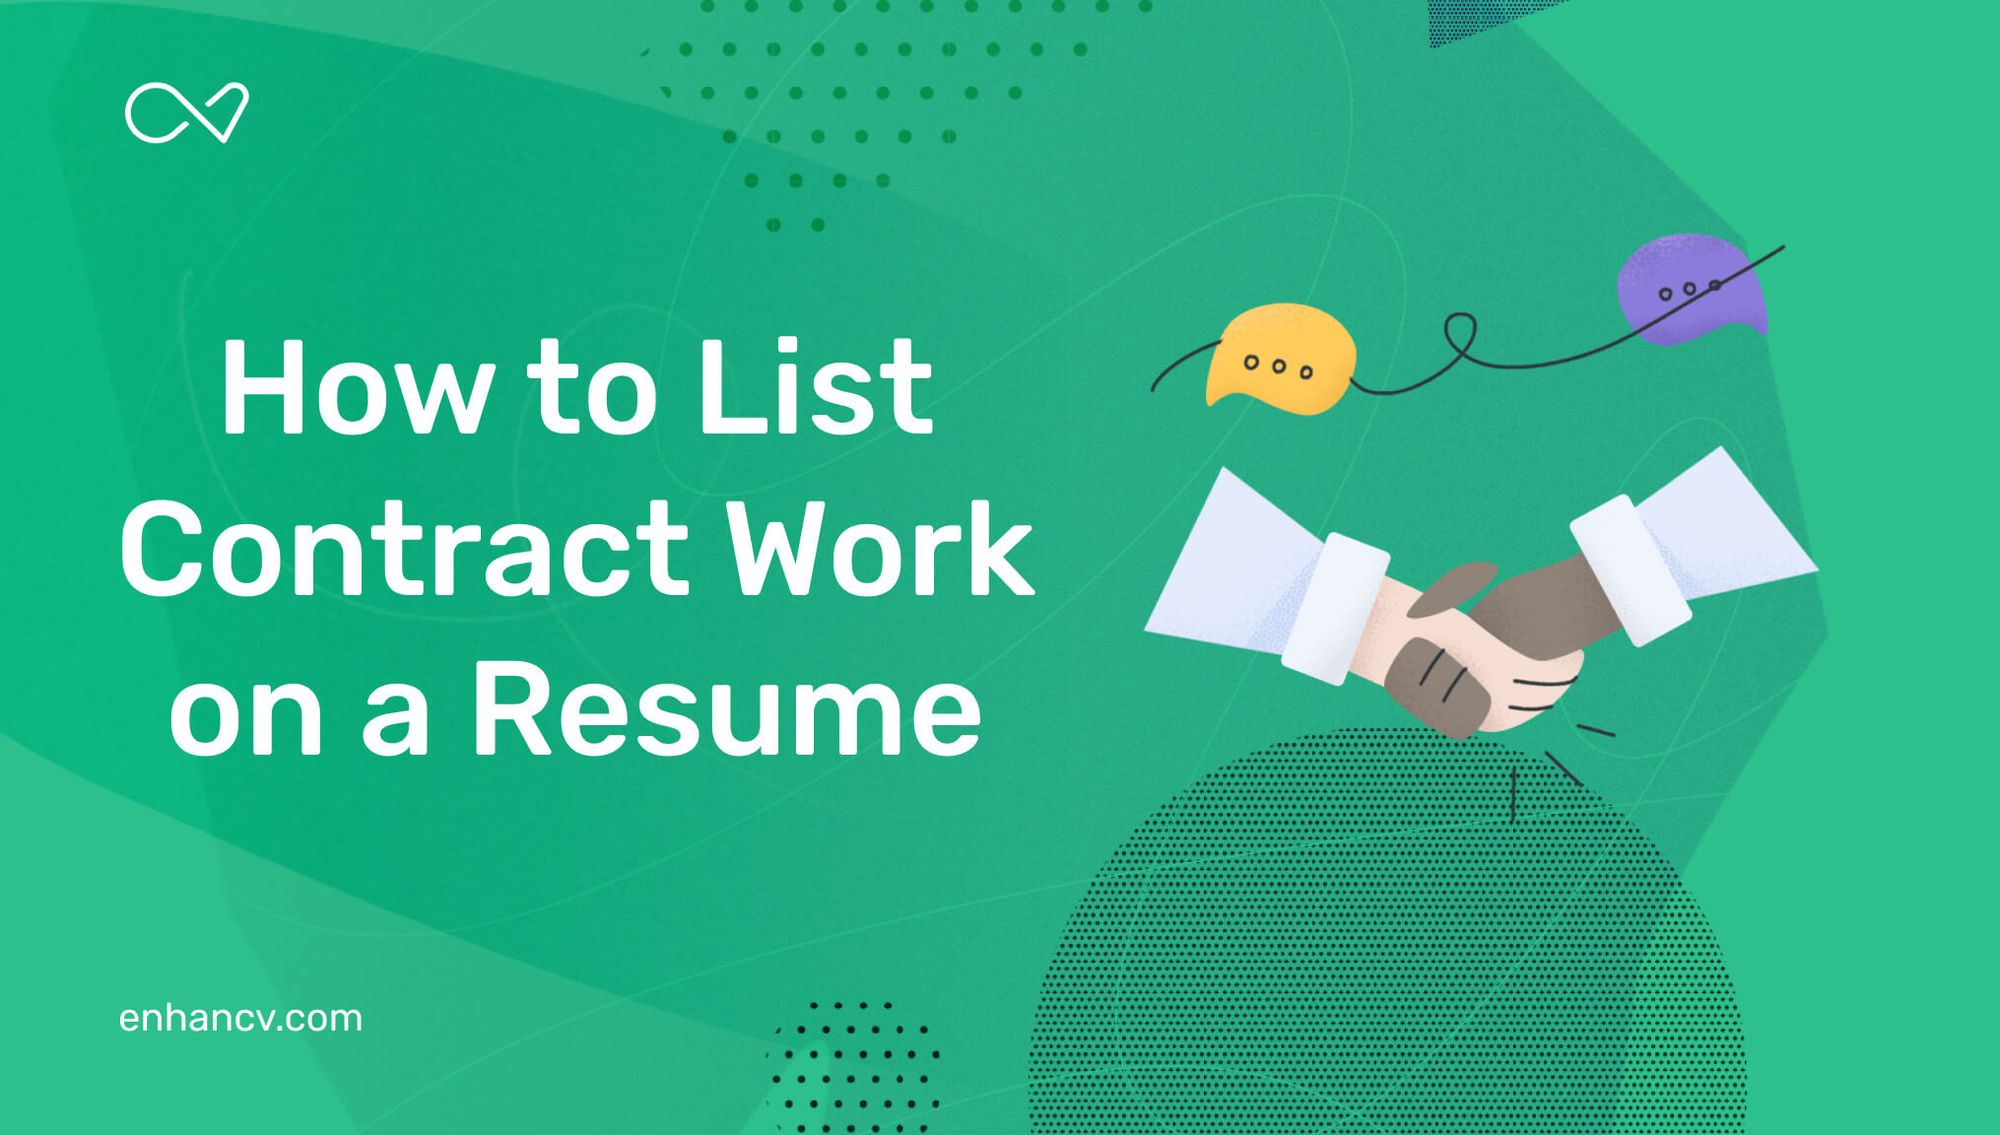 How To List Contract Work on Your Resume